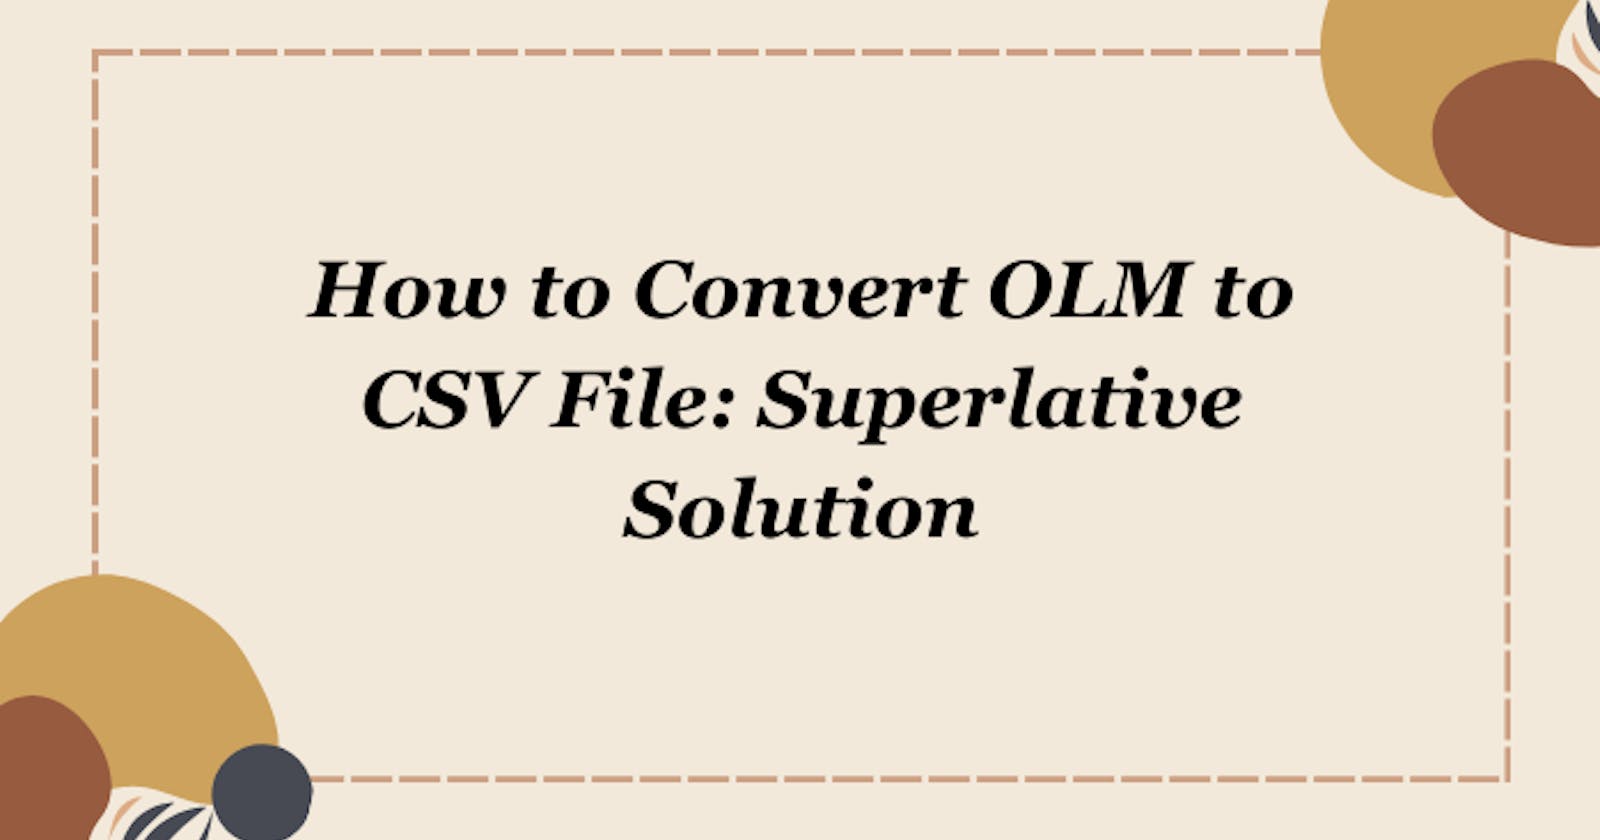 How to Convert OLM to CSV File: Superlative Solution